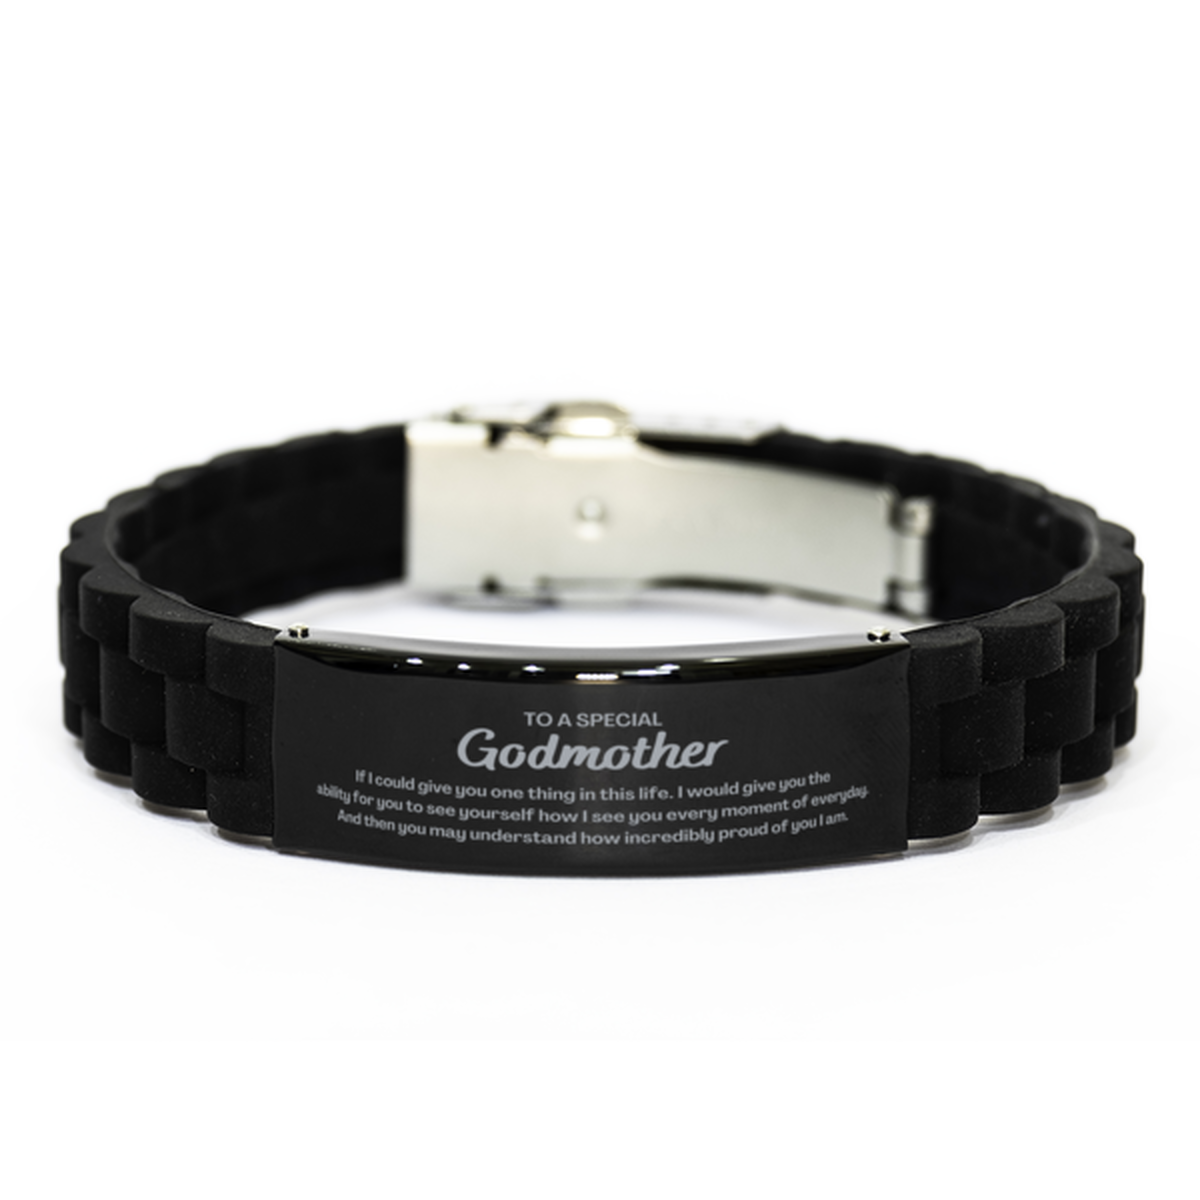 To My Godmother Black Glidelock Clasp Bracelet, Gifts For Godmother Engraved, Inspirational Gifts for Christmas Birthday, Epic Gifts for Godmother To A Special Godmother how incredibly proud of you I am